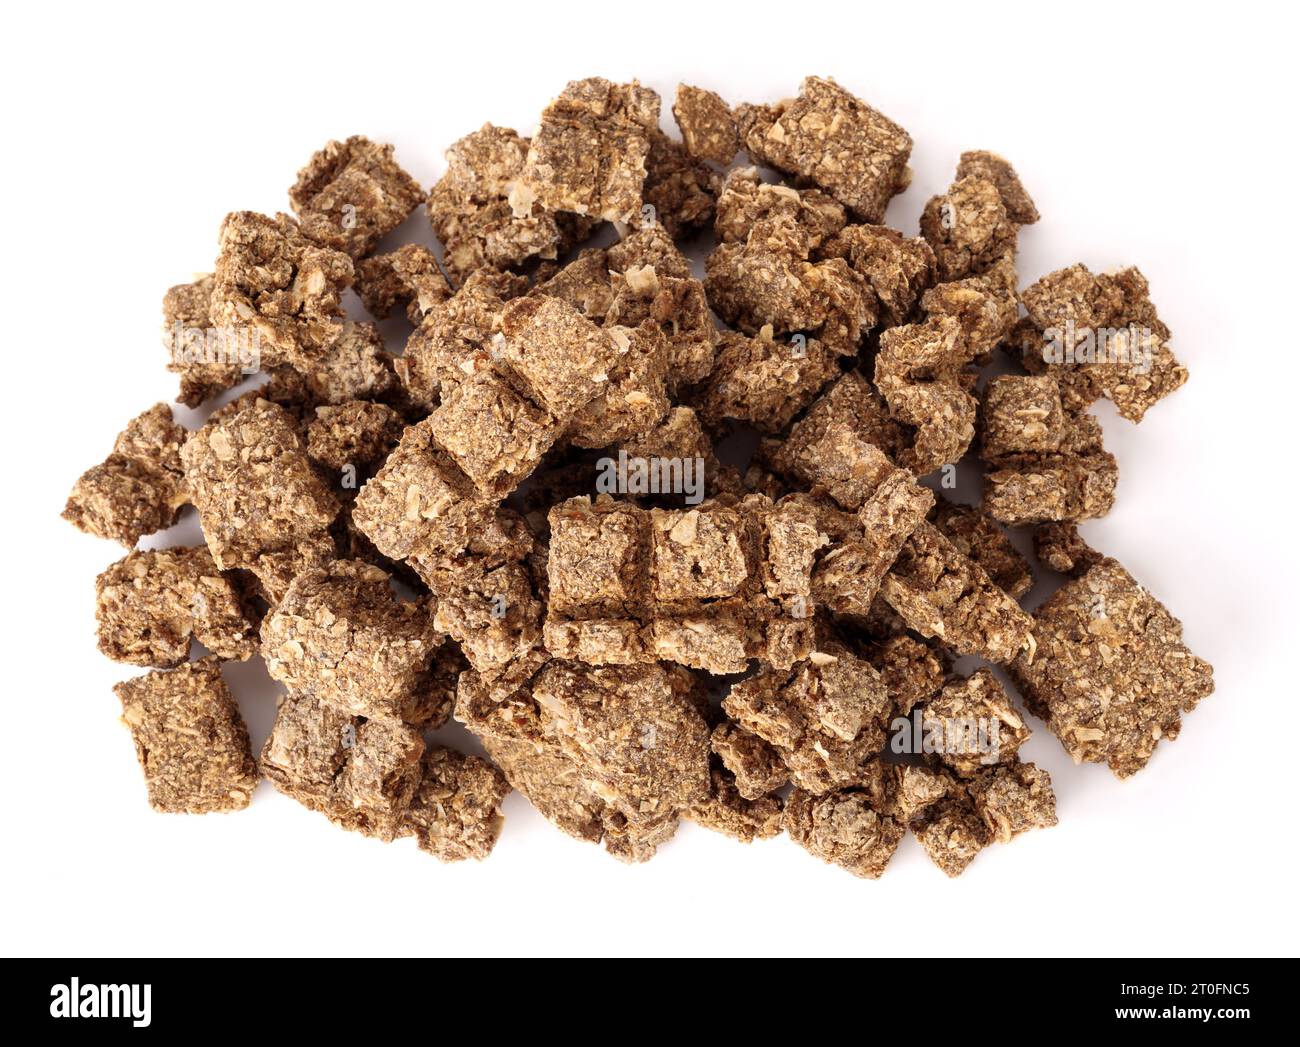 Top view of dried fish pieces for dogs and cats. Snack, treat or reward. Heap of dehydrated flaky fish chunks. Healthy dog snack or health supplement Stock Photo